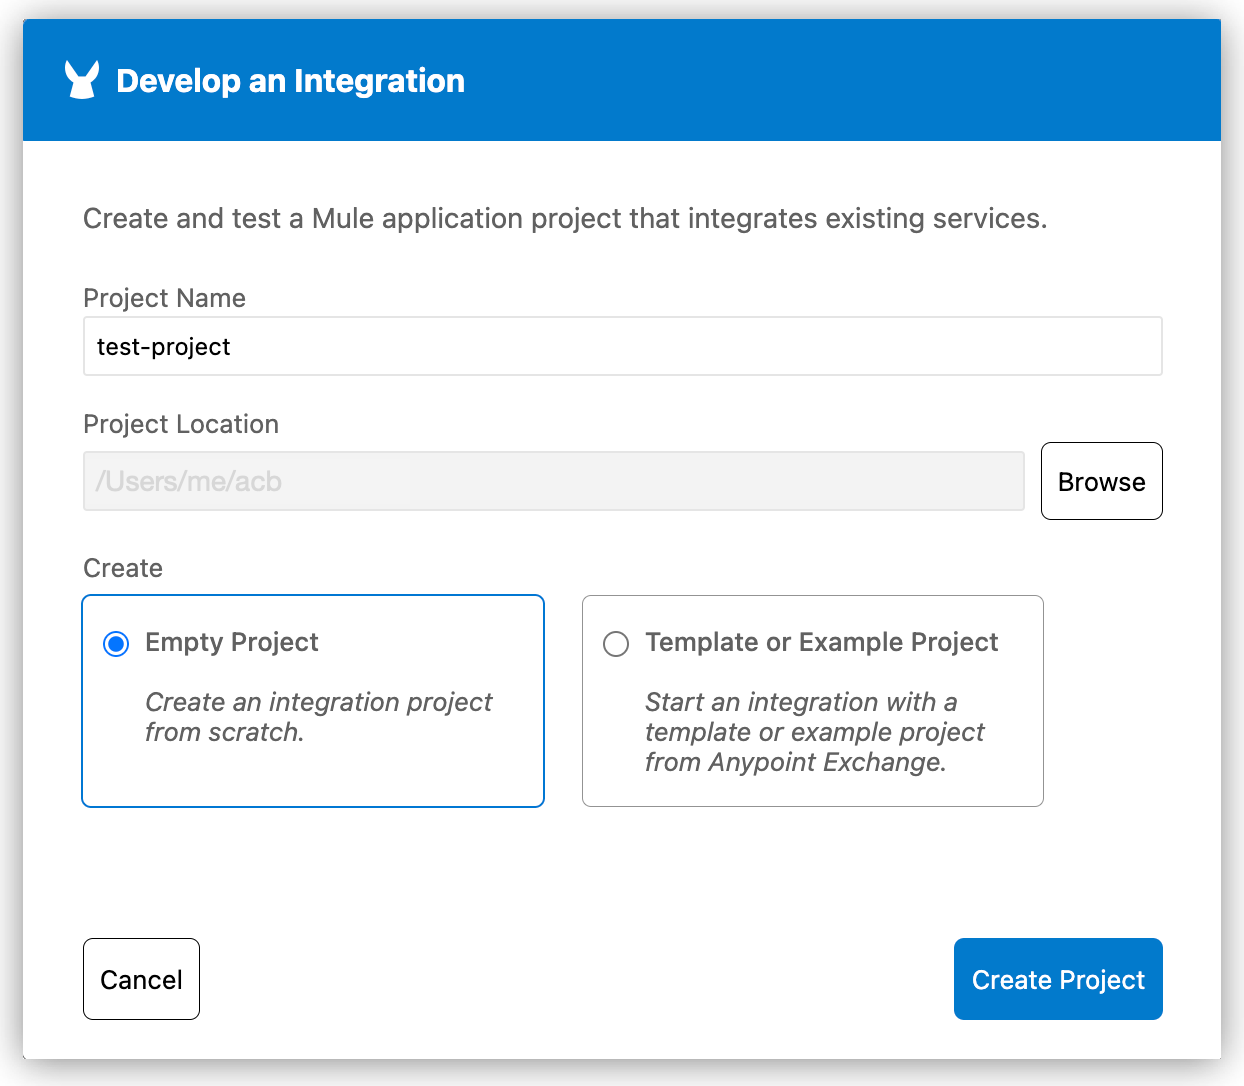 Create integration project from scratch.